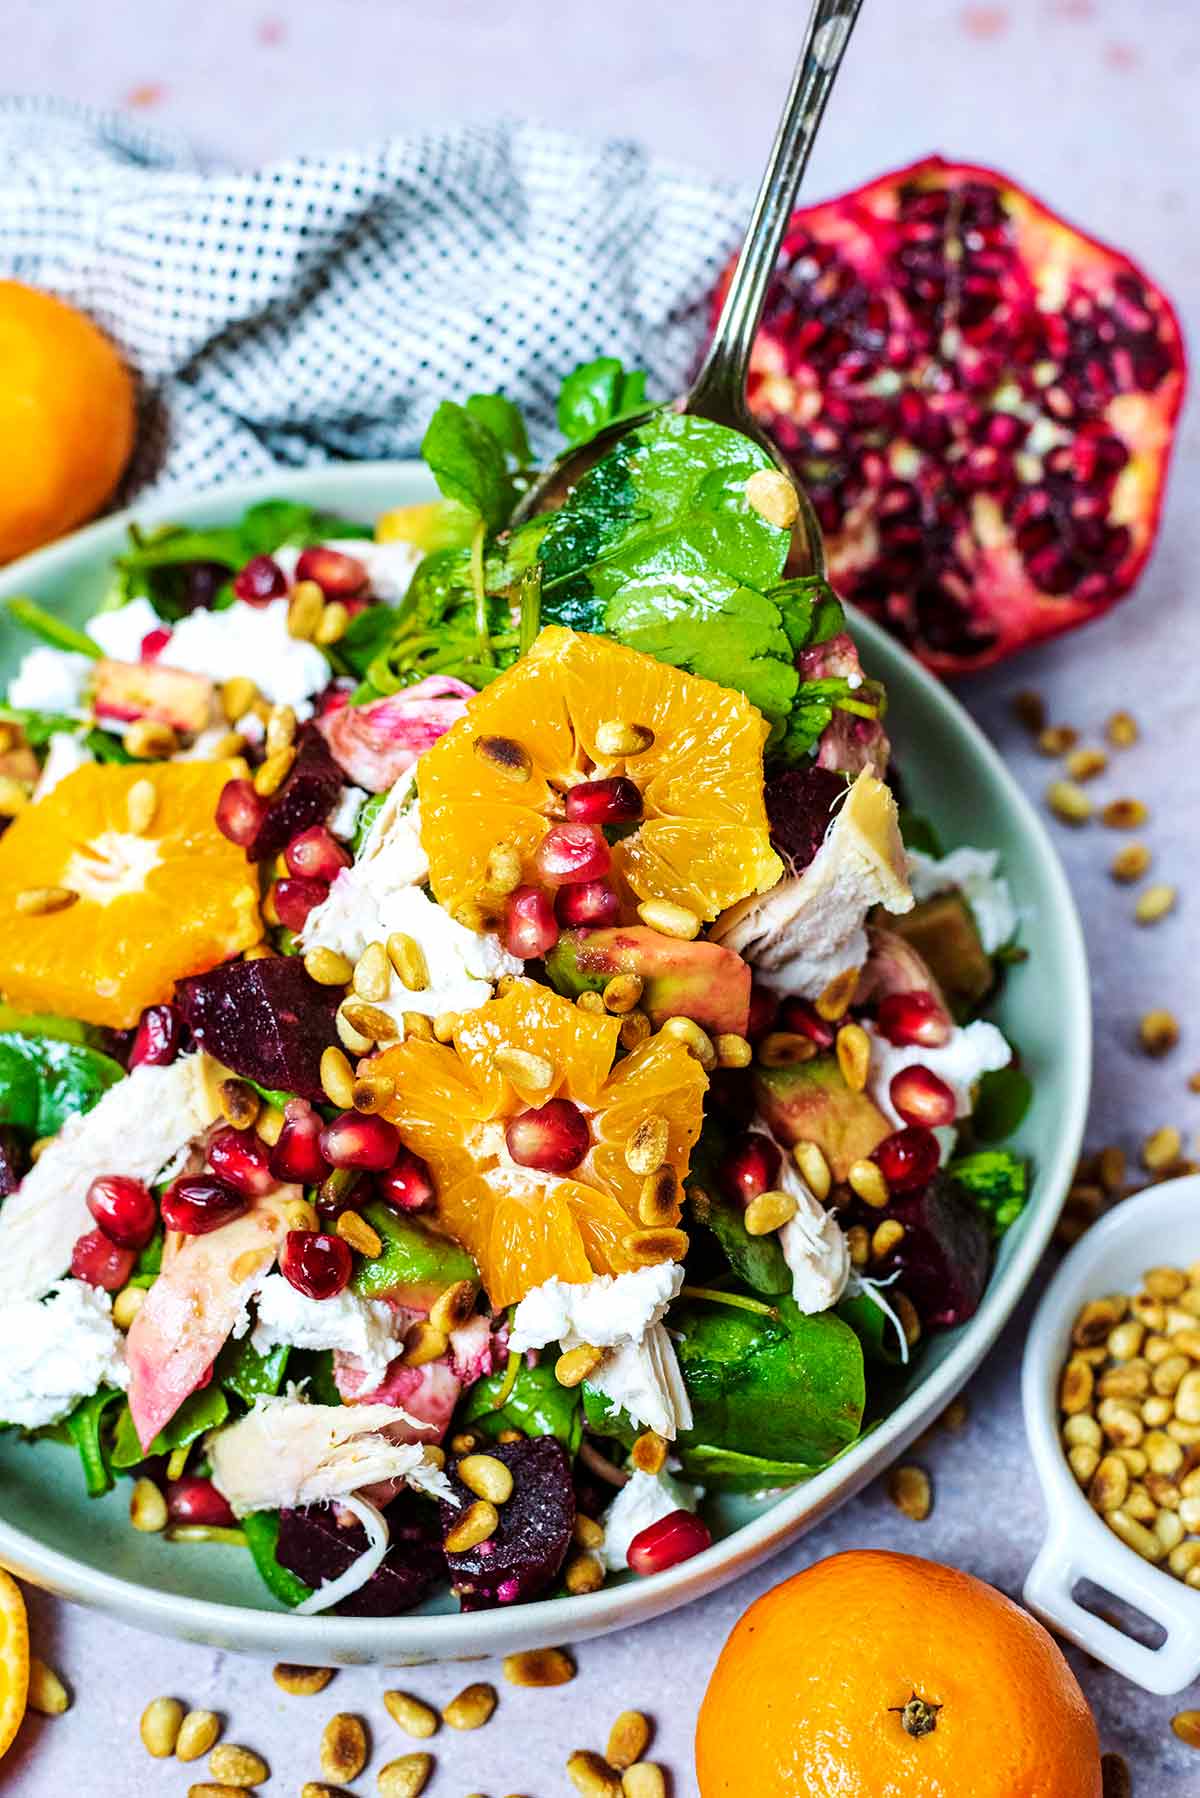 A bowl of clementine salad in front of half a pomegranate.